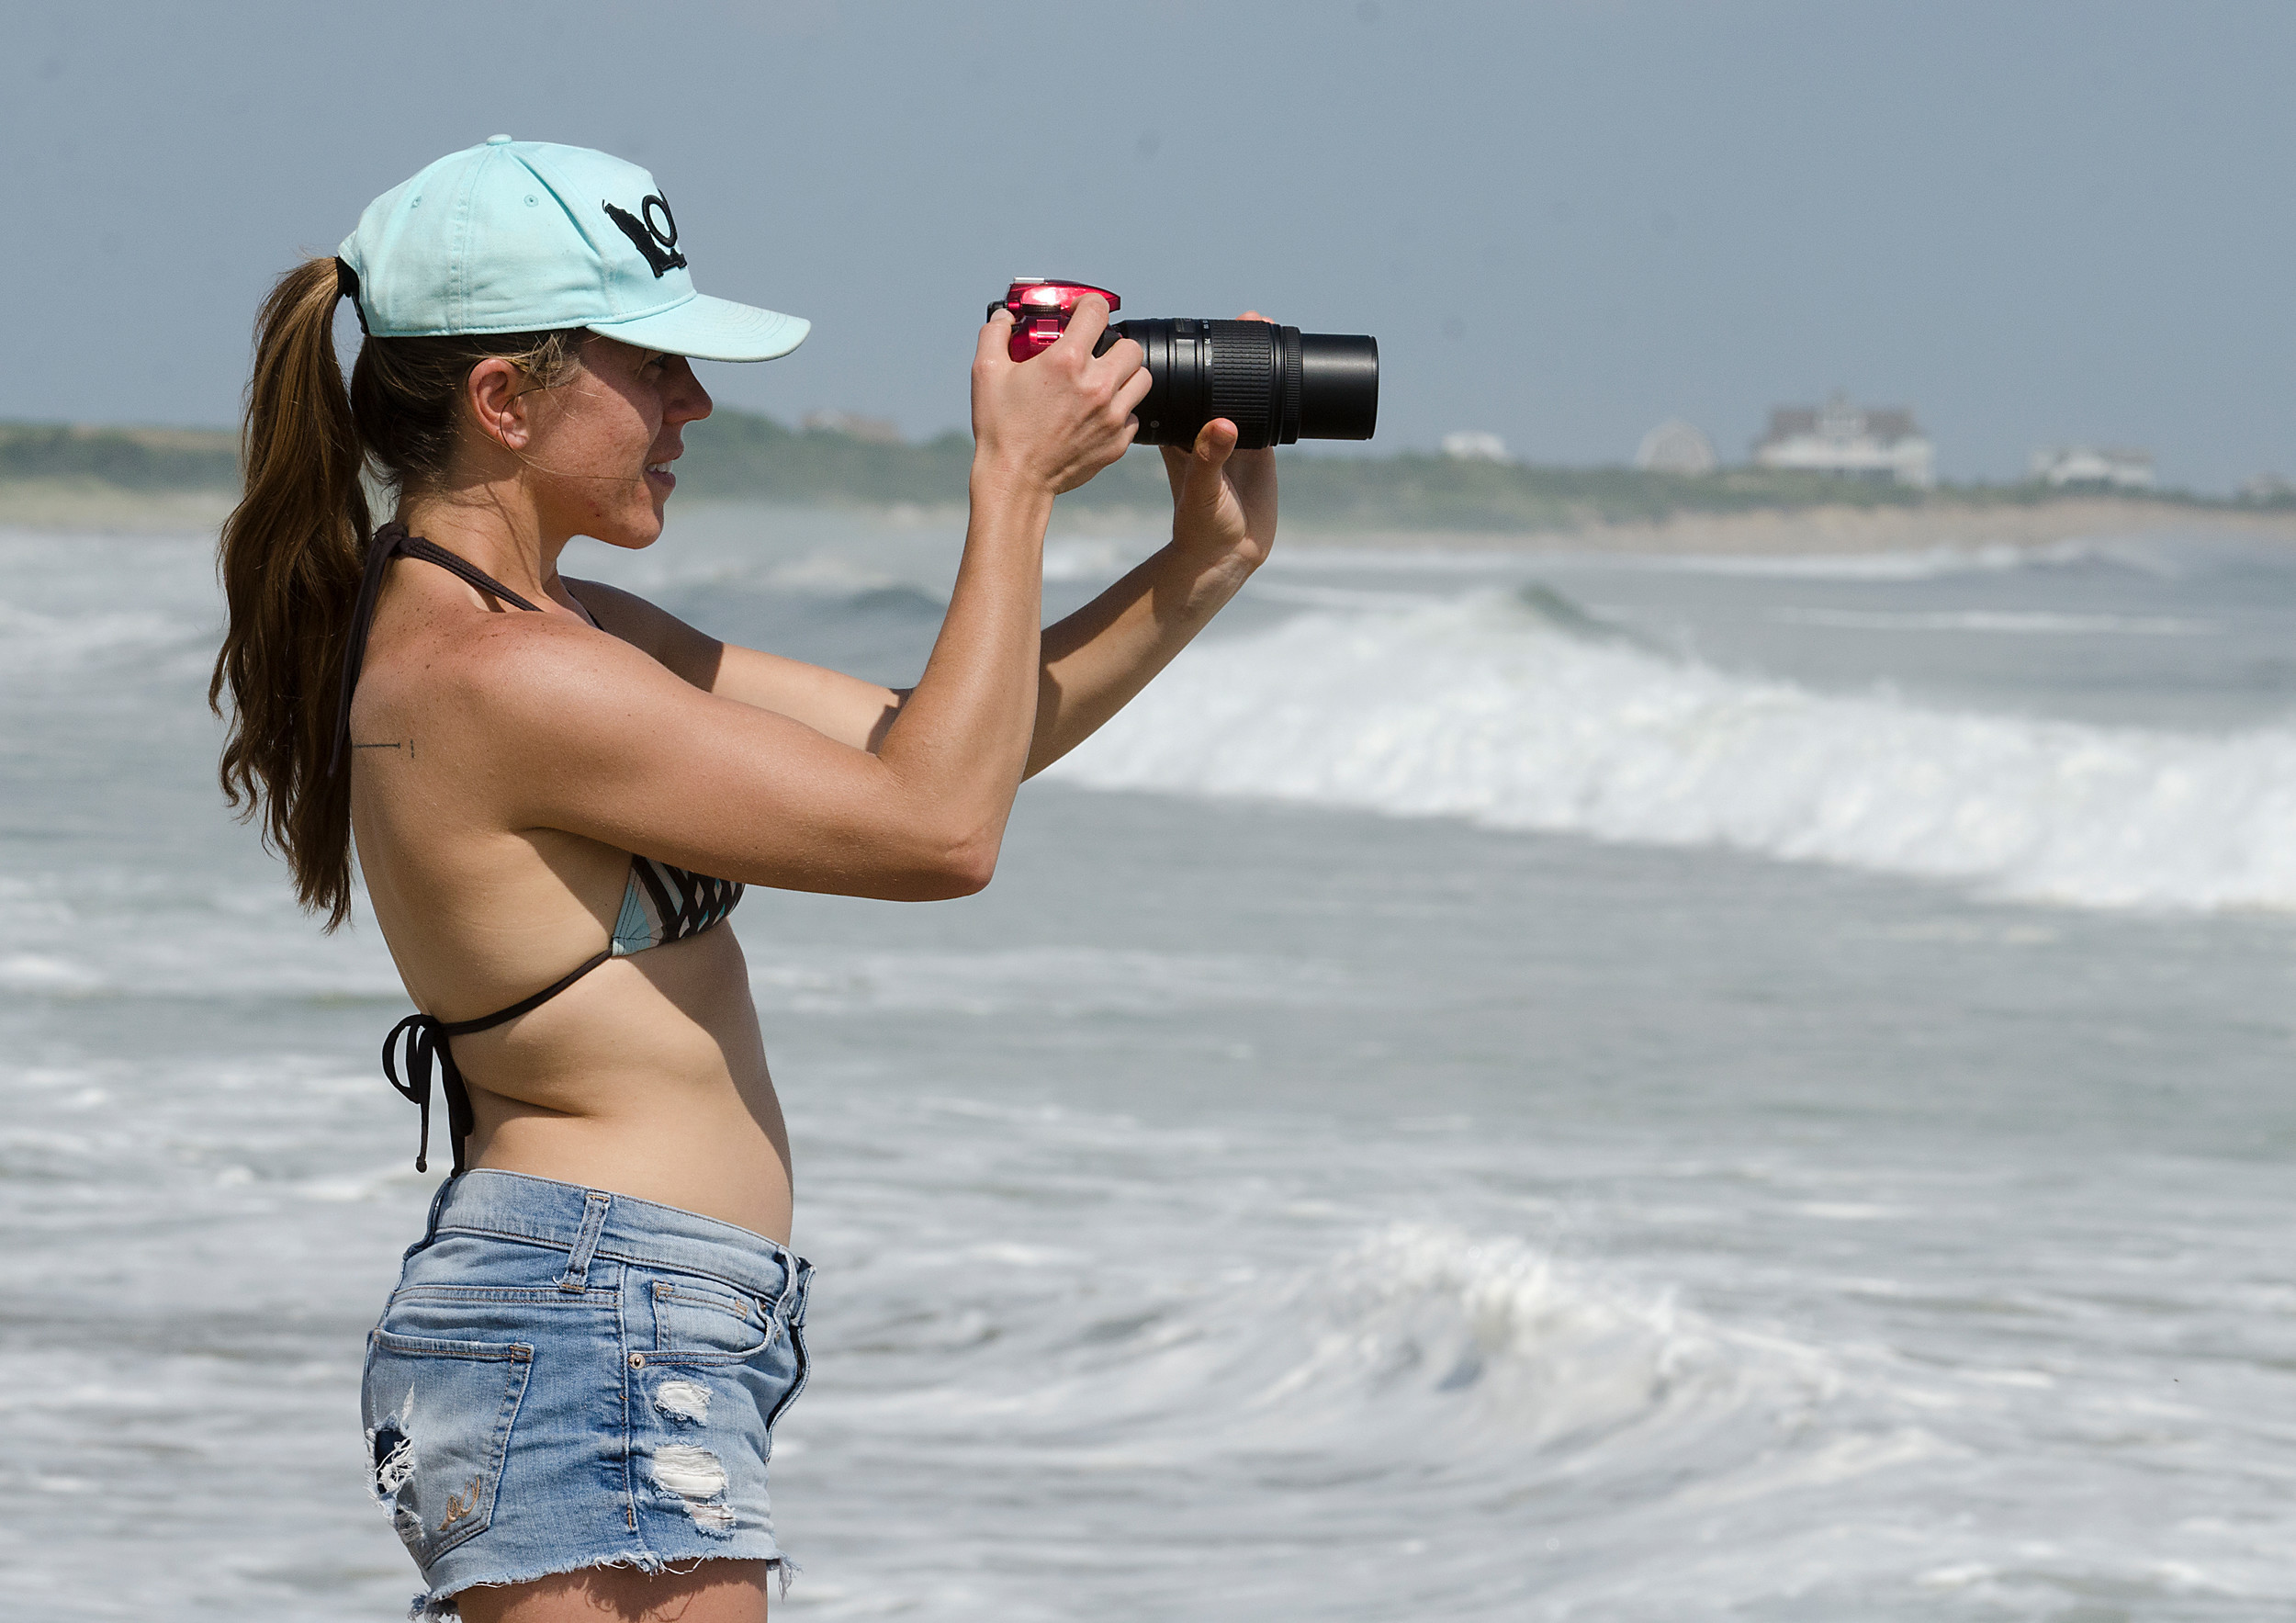 Sarah Hope holds her camera steady while taking video of her spouse, Monica Riehl.